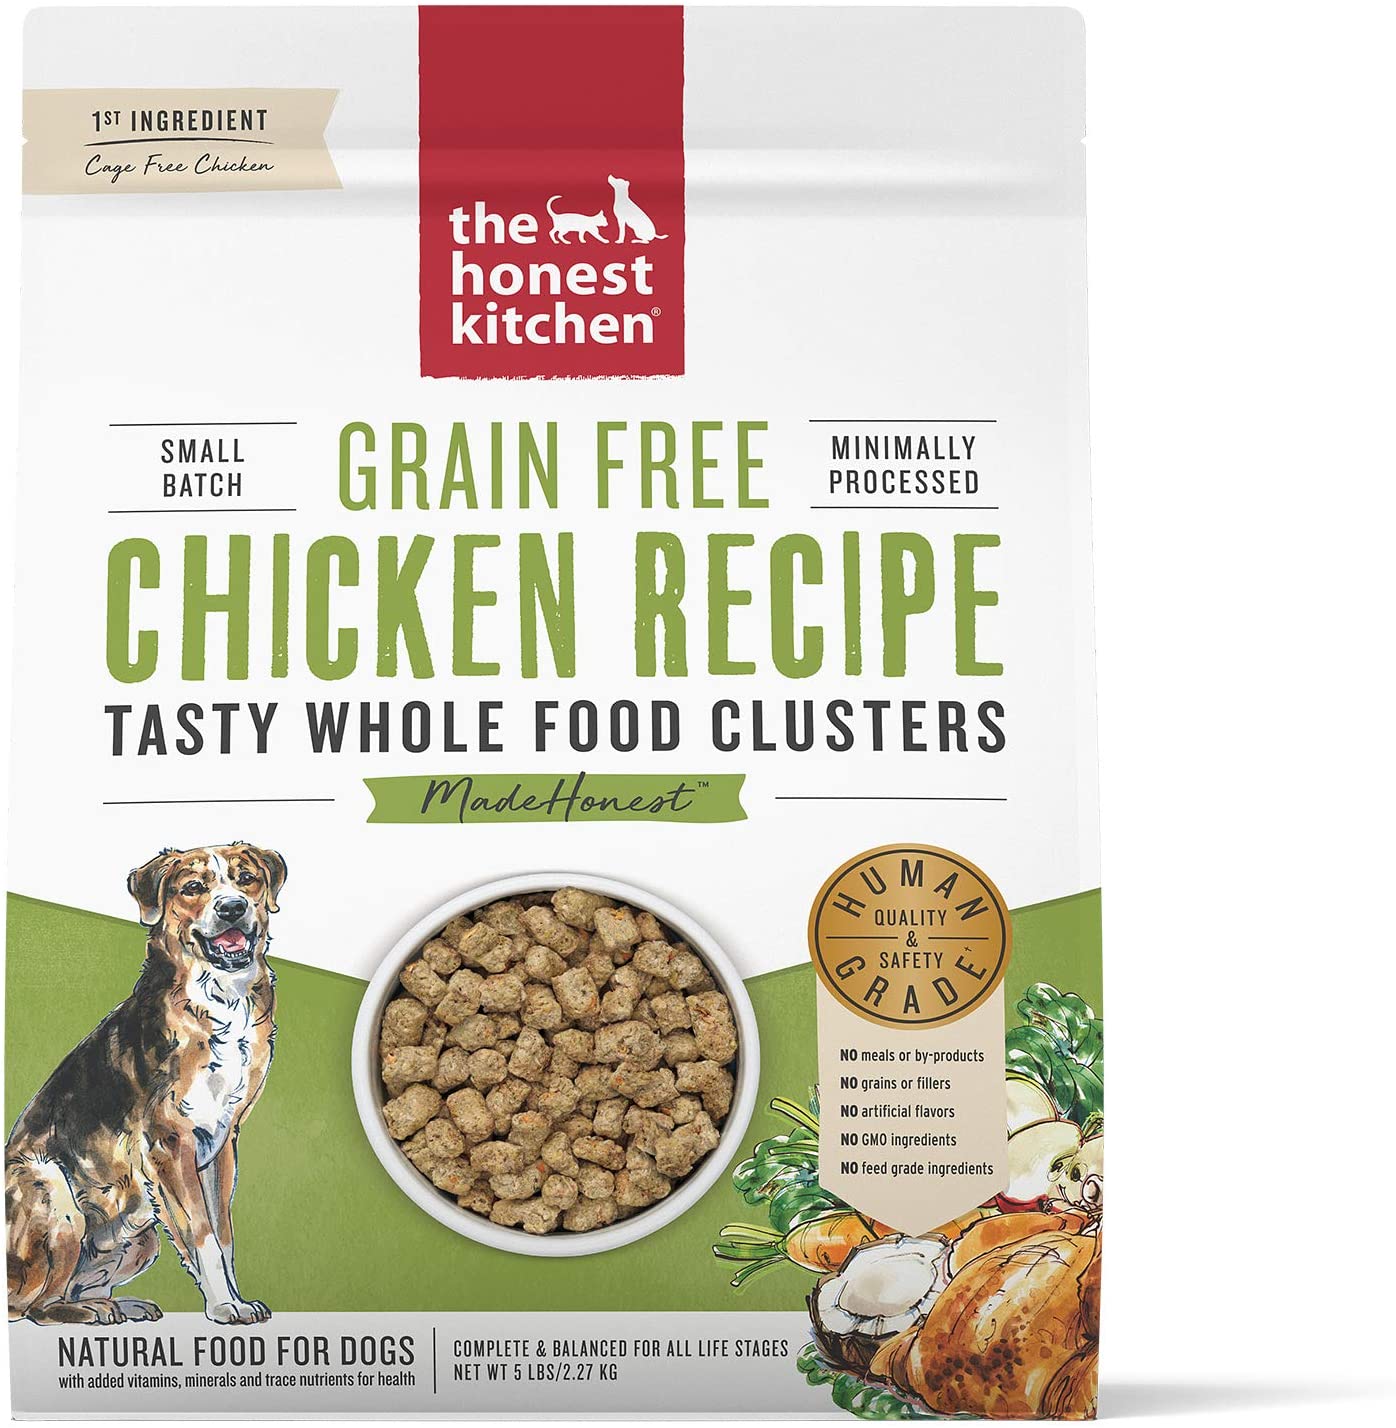 Affordable Wet & Dry Dog Food Brands Reviewed Which is Best?